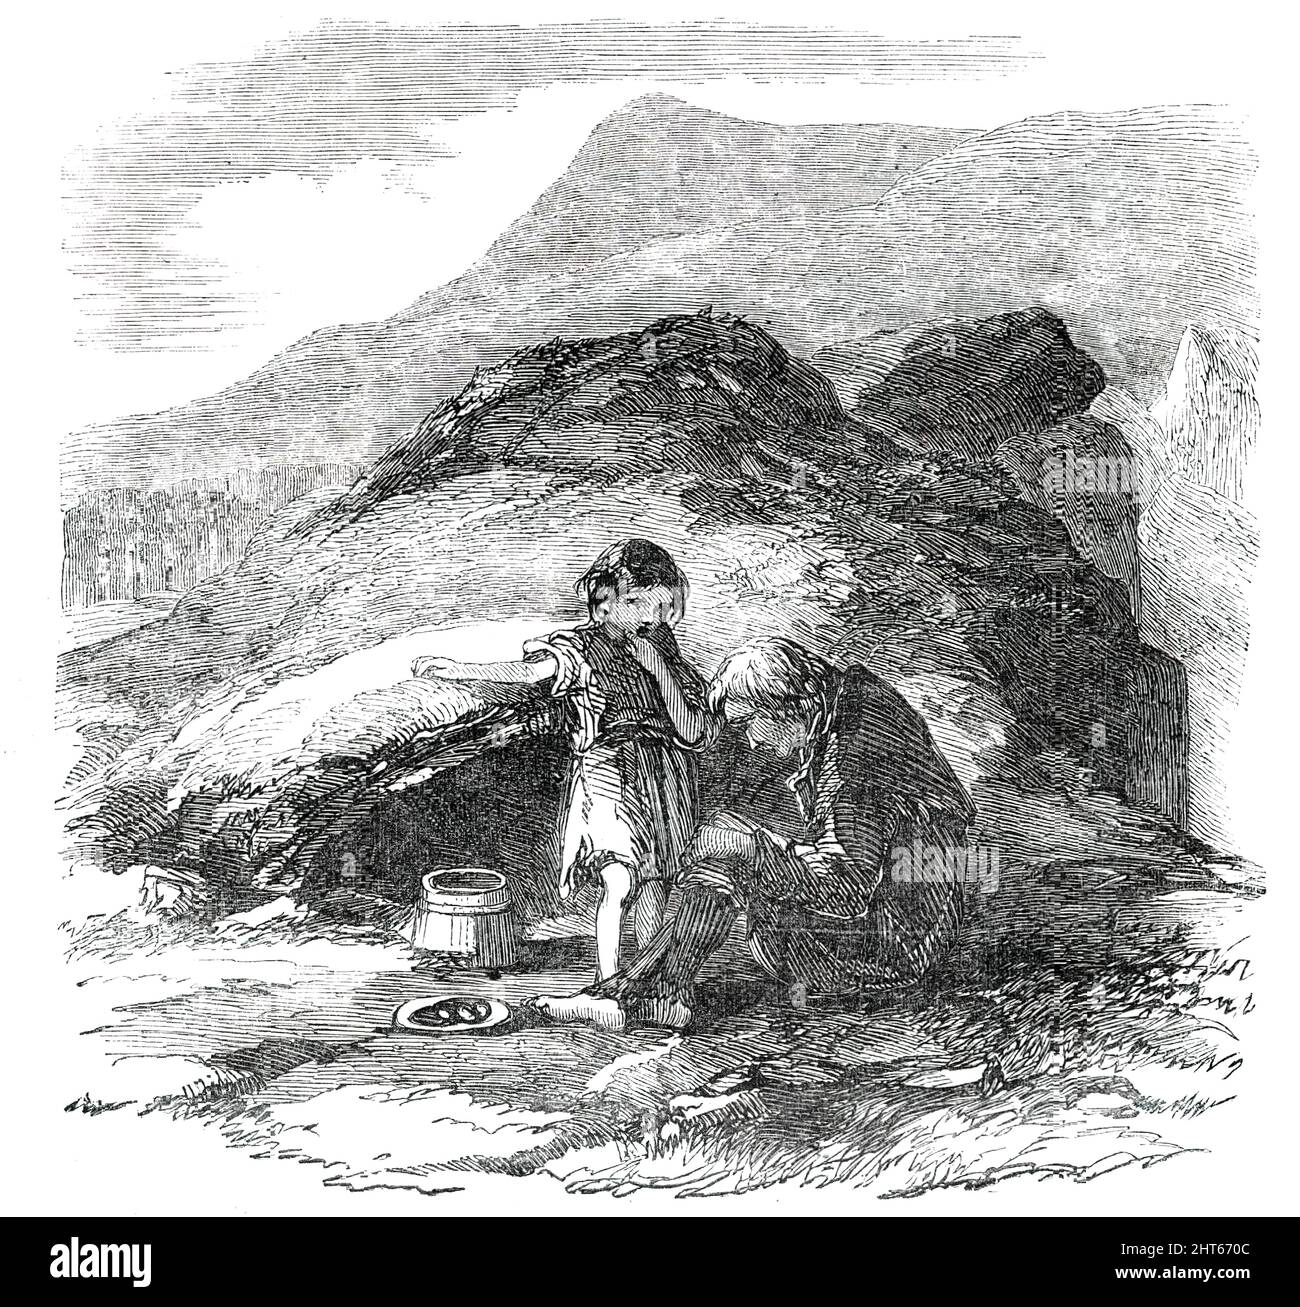 Keillines, near General Thompson's Property, 1850. Poverty in Ireland during the Potato Famine. Scene '...on the road between Maam and Clifden, in Joyce's County, once famous for the Patagonian stature of the inhabitants, who are now starved down to ordinary dimensions. High up on the mountain, but on the road-side, stands the scalpeen of Keillines. It is near General Thompson's property. Conceive five human beings living in such a hole: the father was out, at work; the mother was getting fuel on the hills, and the children left in the hut could only say they were hungry. Their appearance conf Stock Photo